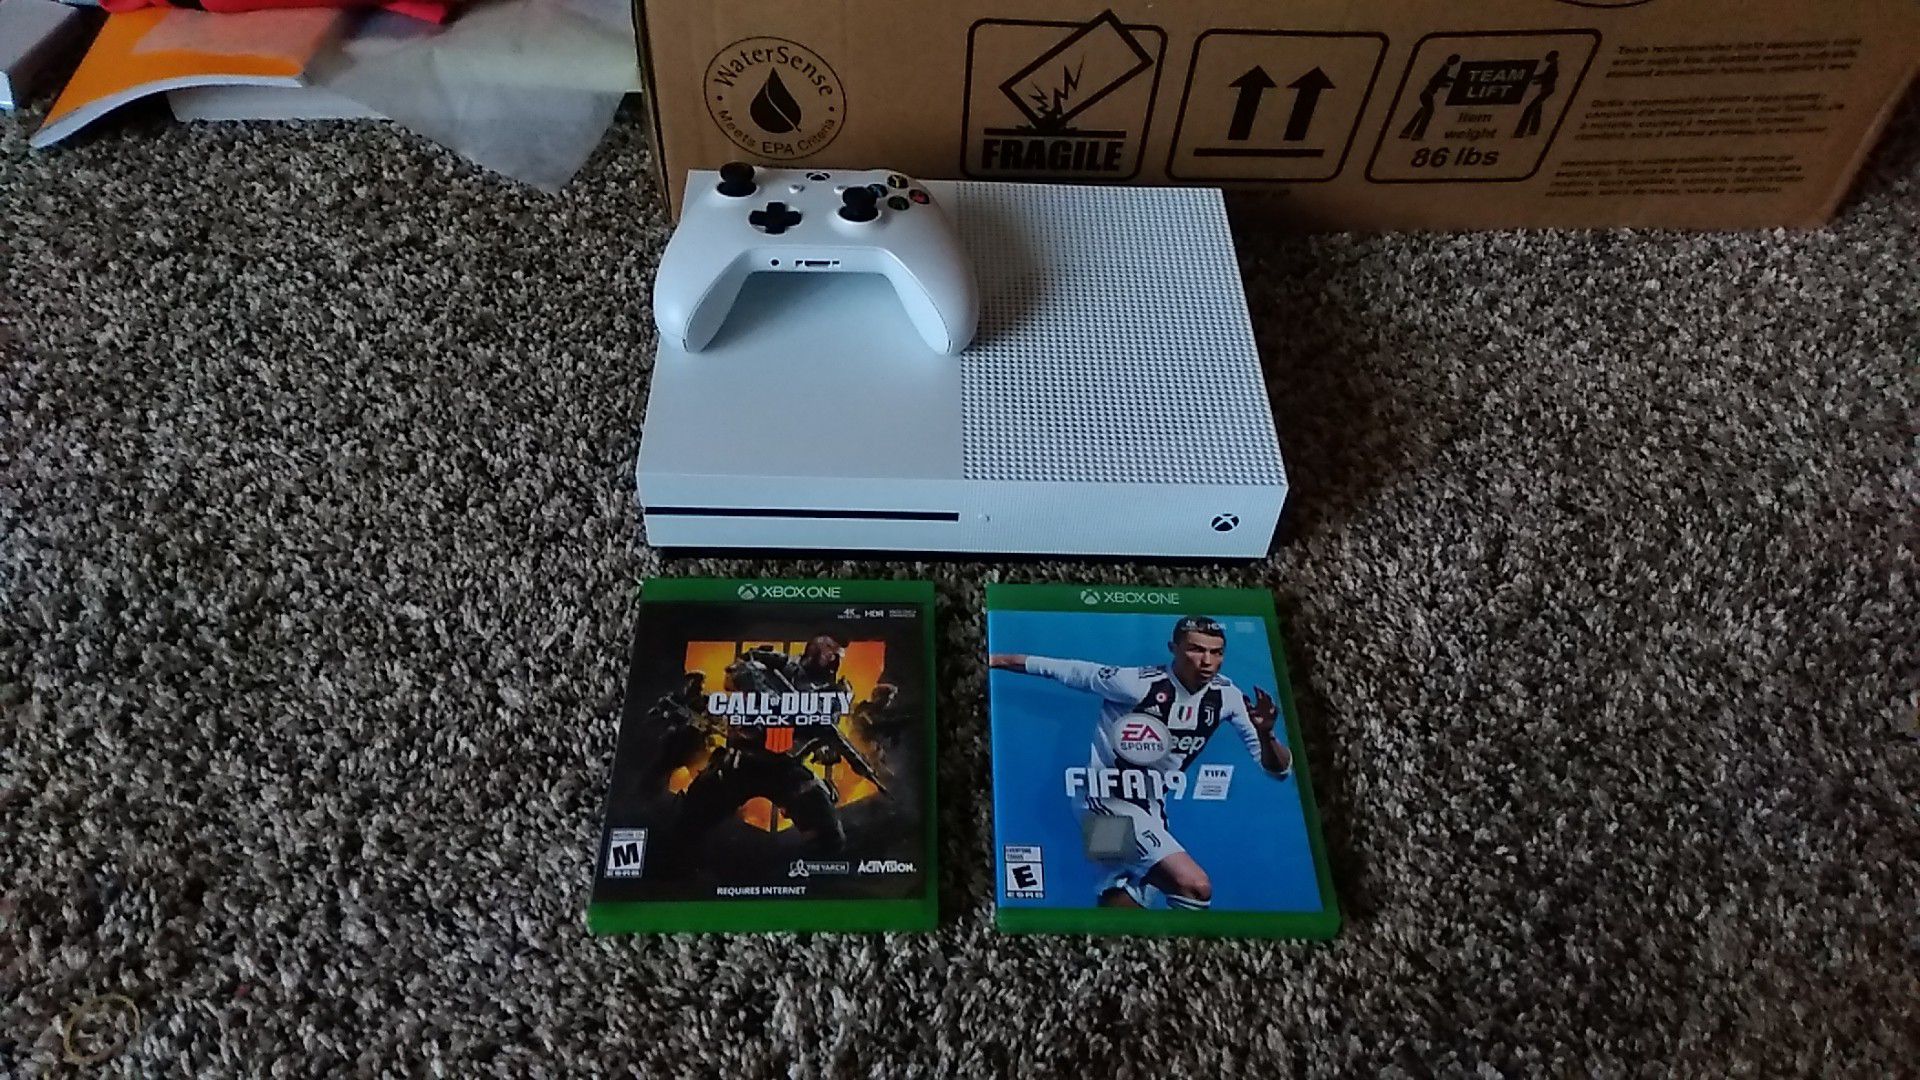 Xbox one S 1tb model with Call of Duty 4 and Fifa19